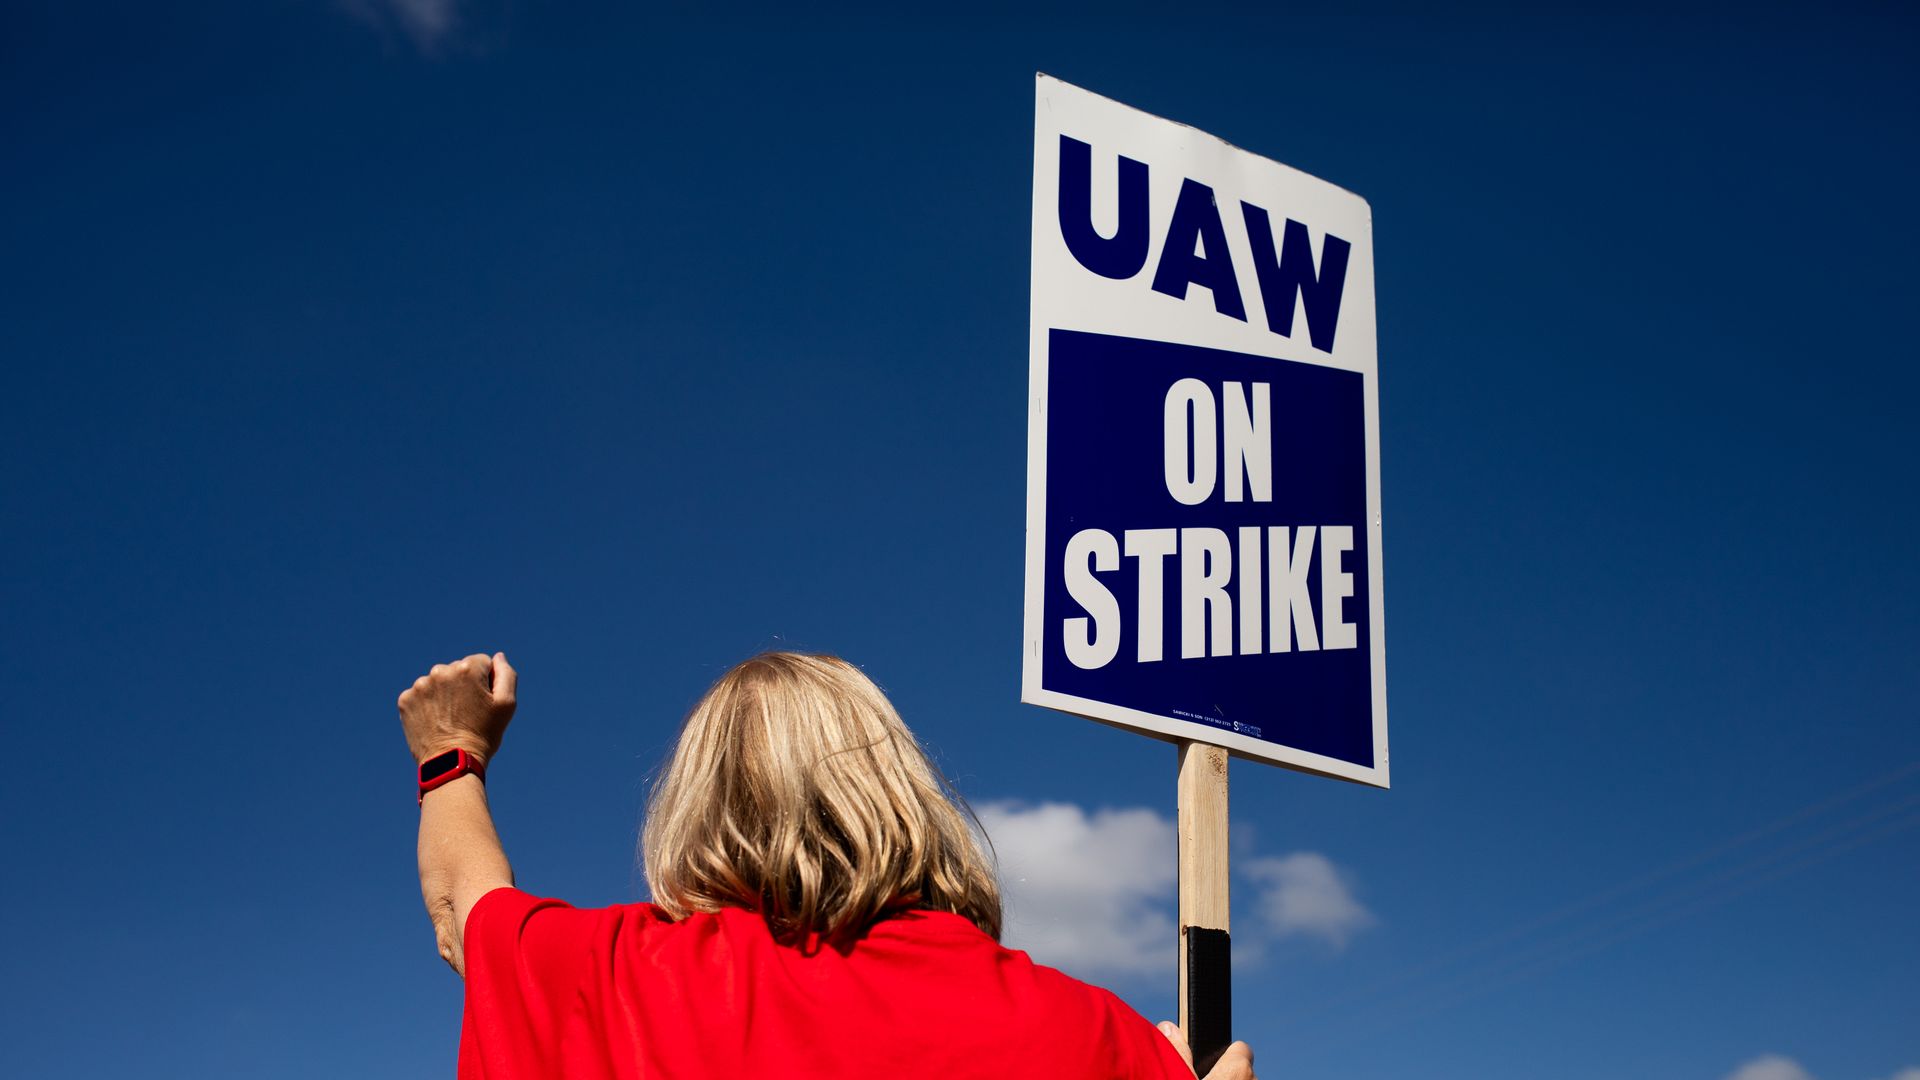 A UAW worker holds up fist with a "UAW on strike" sign.